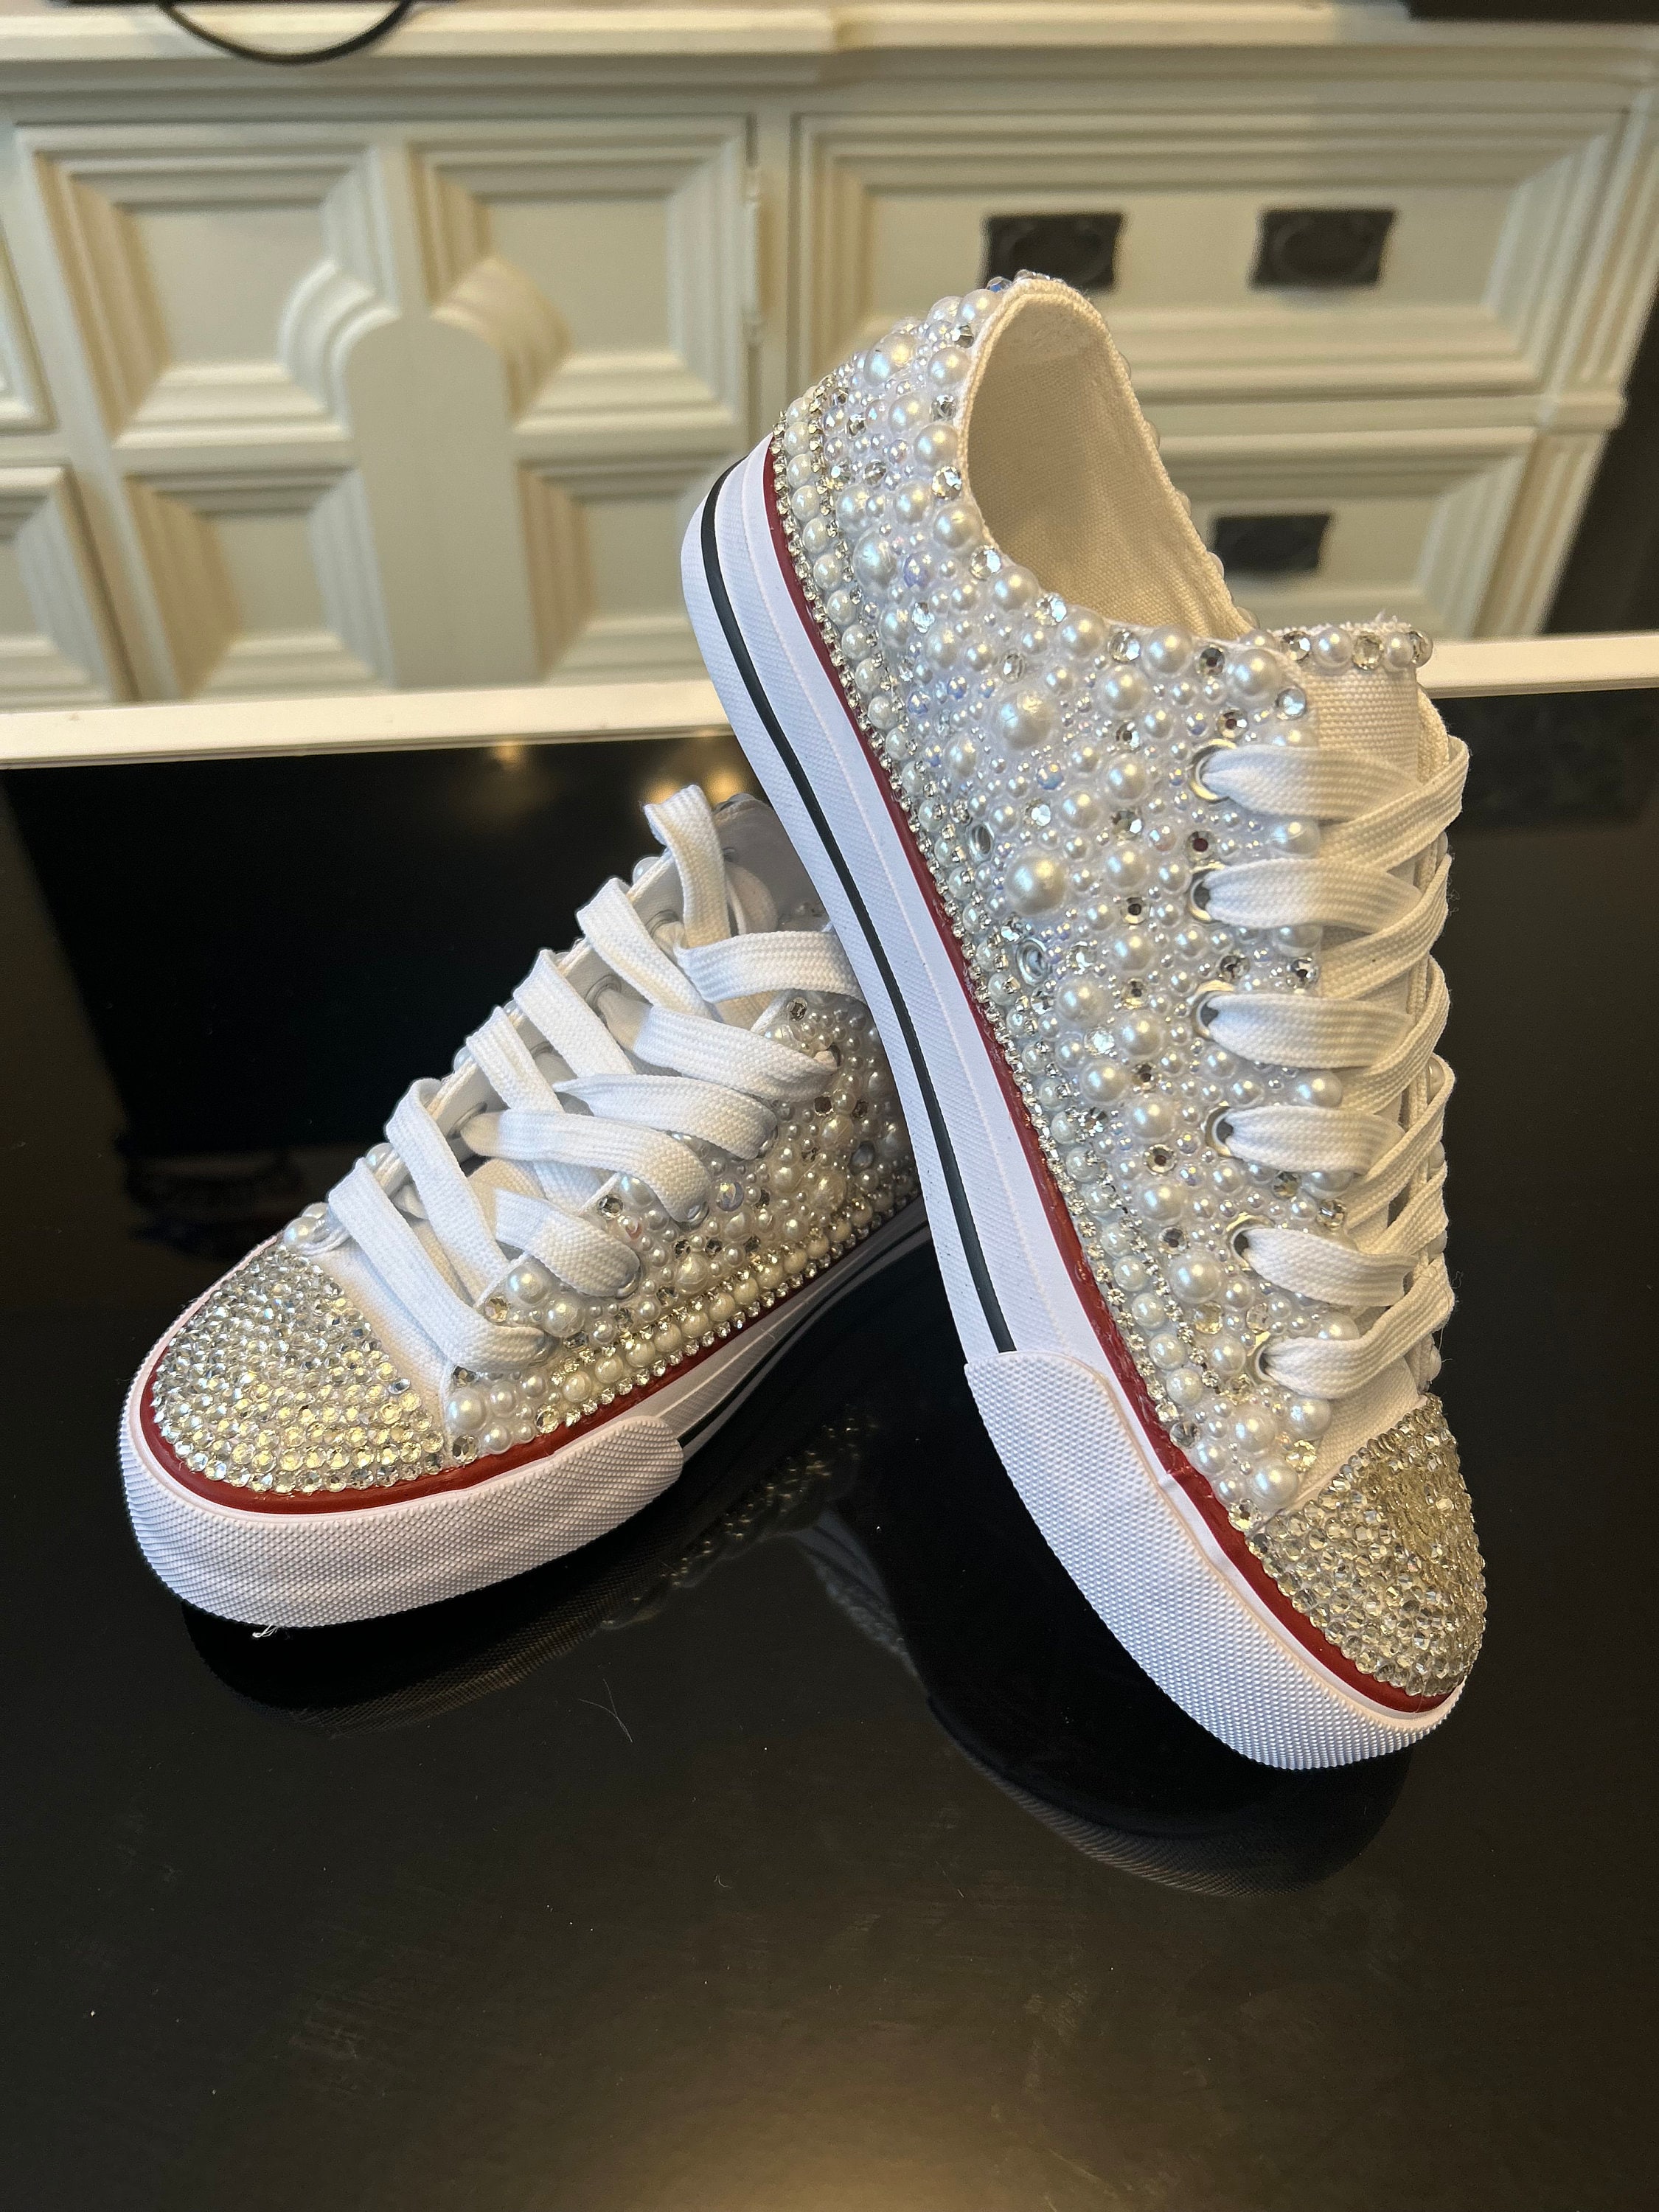 Tina Women's Trainers Athletic Shoes Sneakers Sequins Bling Bling